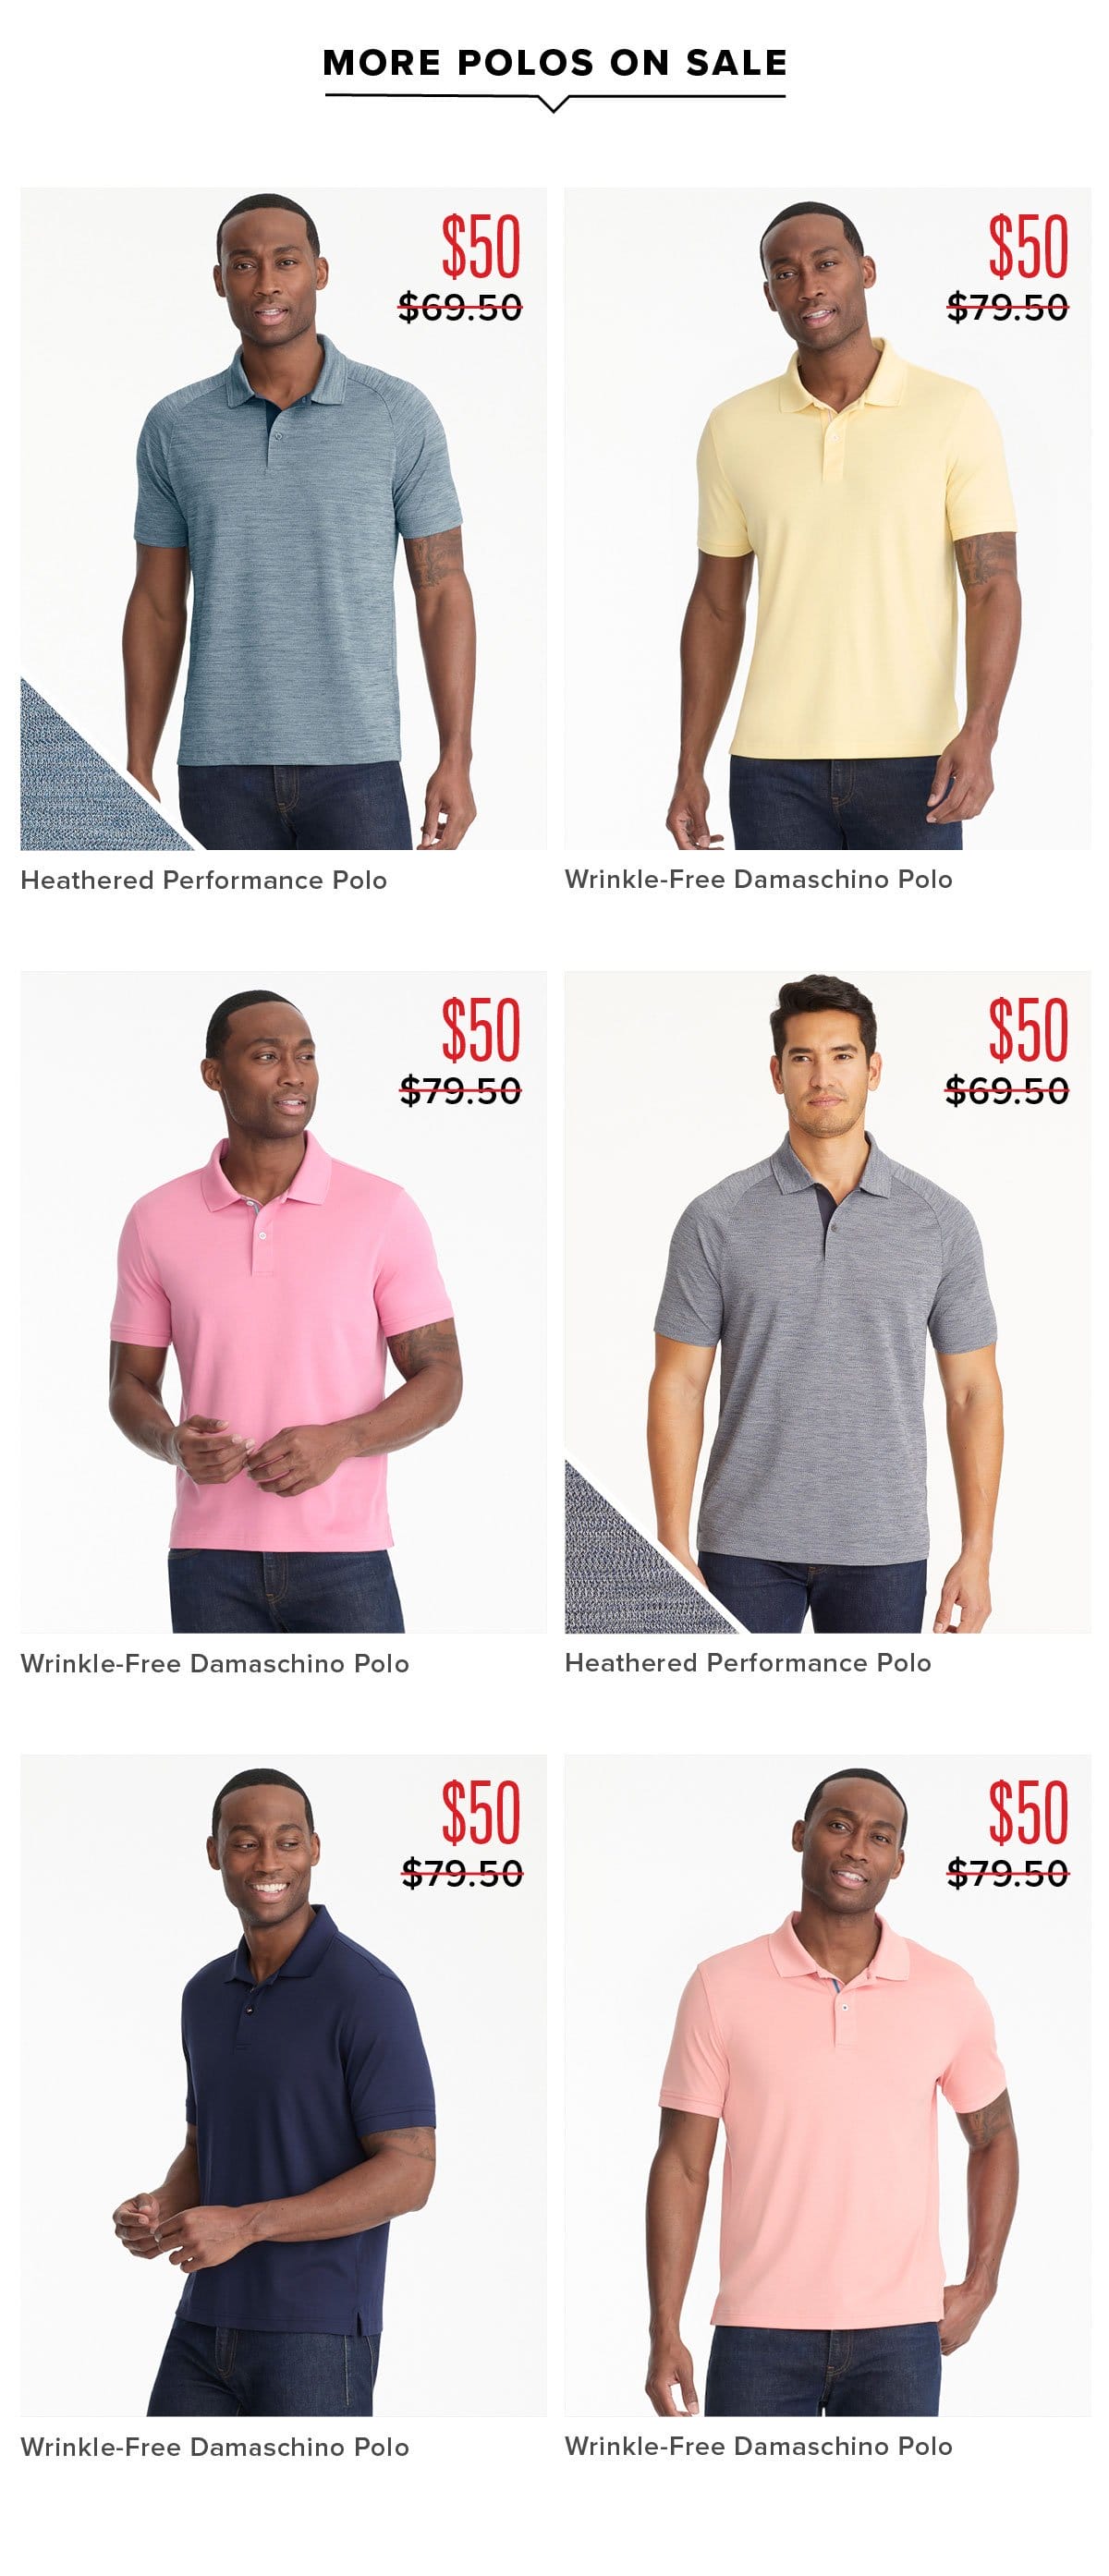 More Polos On Sale